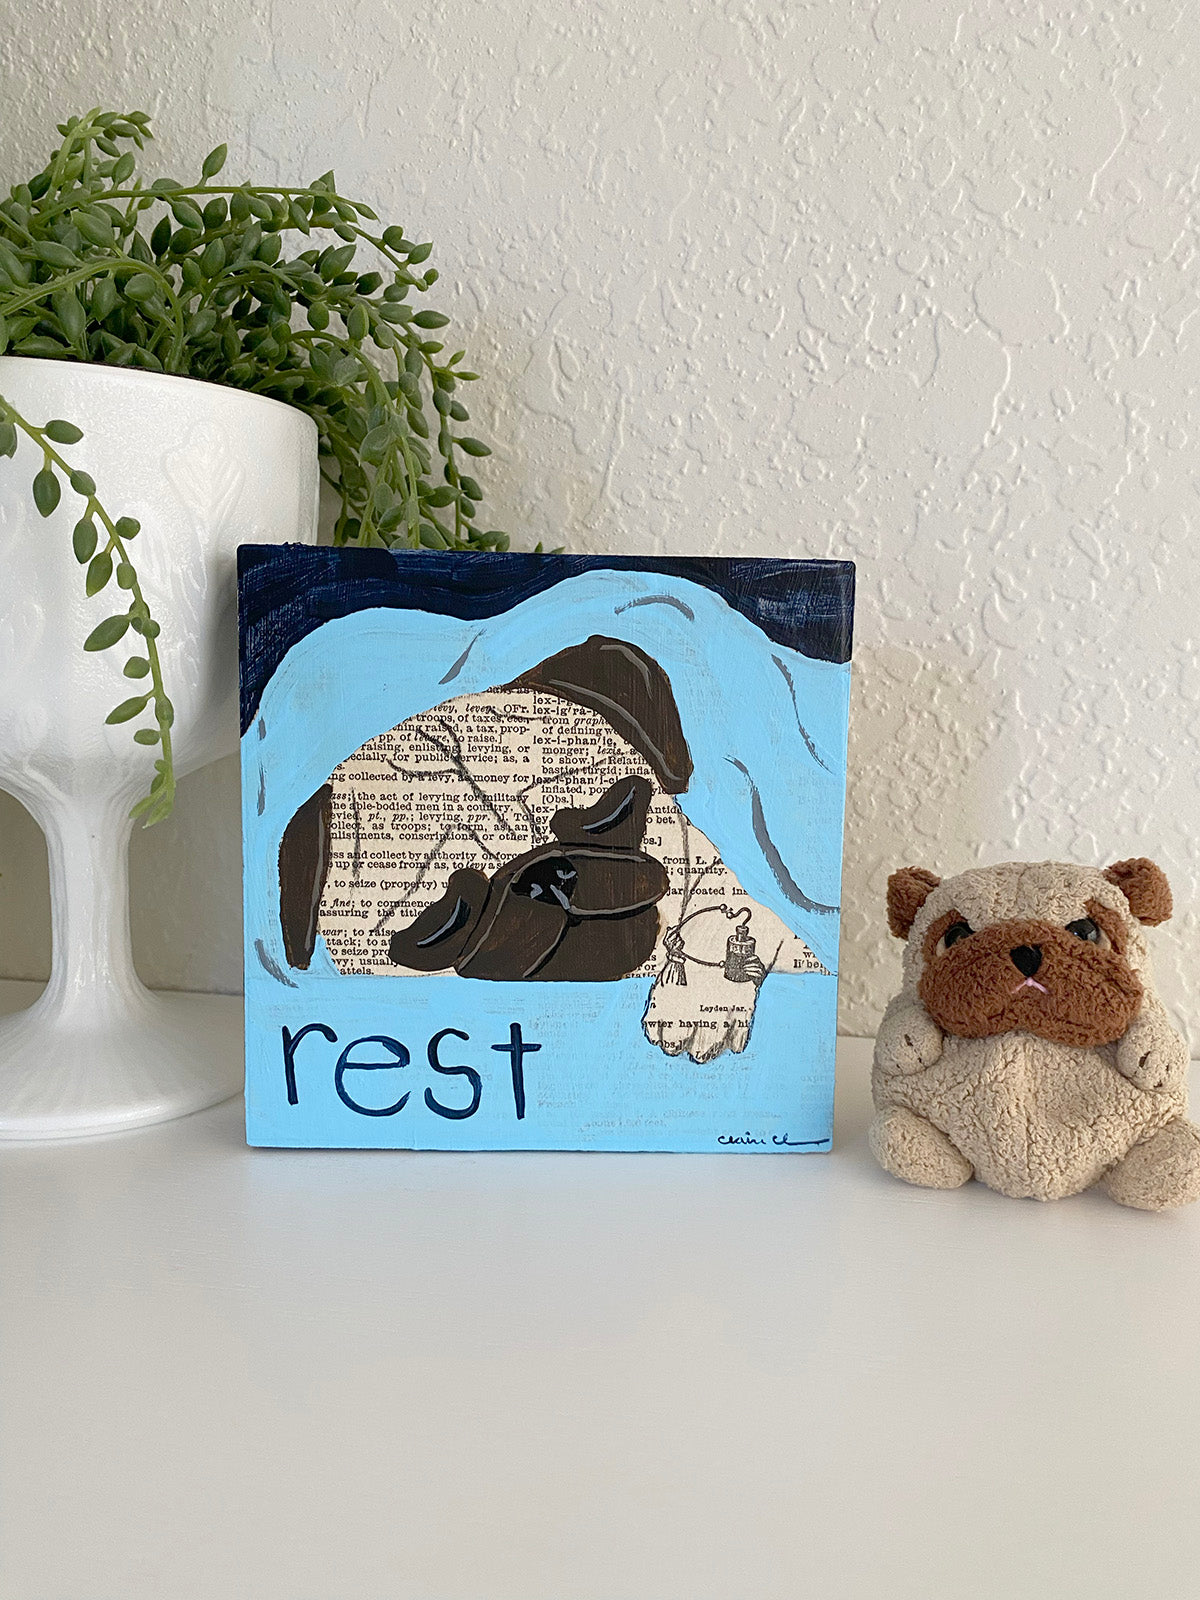 Rest - Original Word of the Year Painting